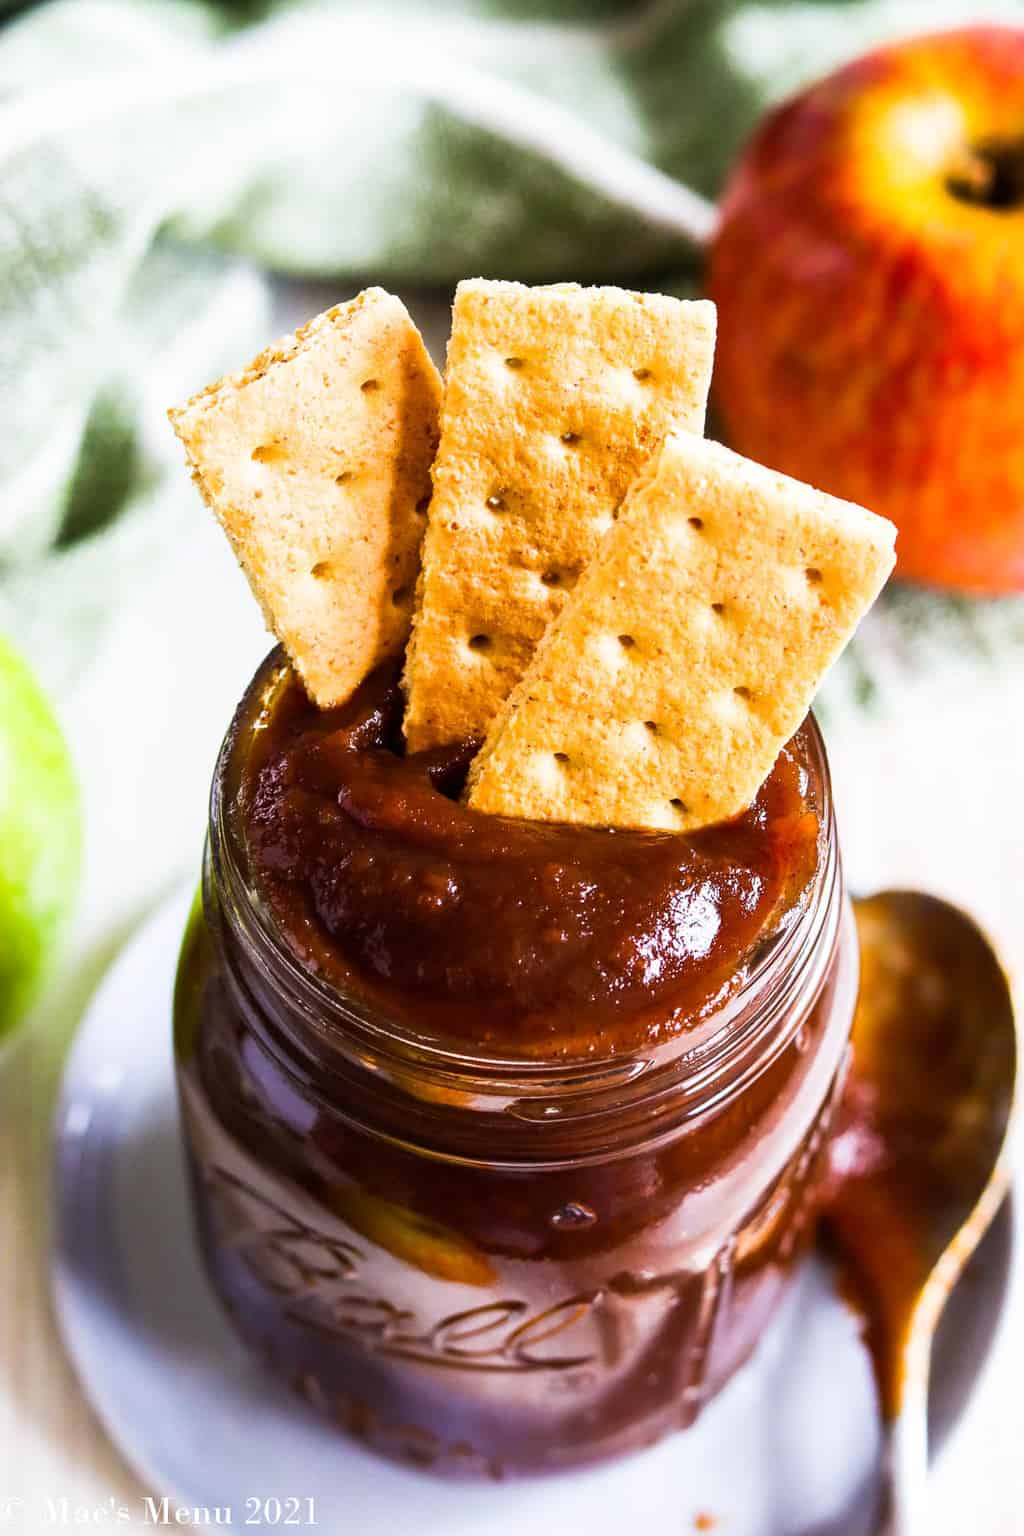 Graham crackers in a jar of apple butter with apples in the background